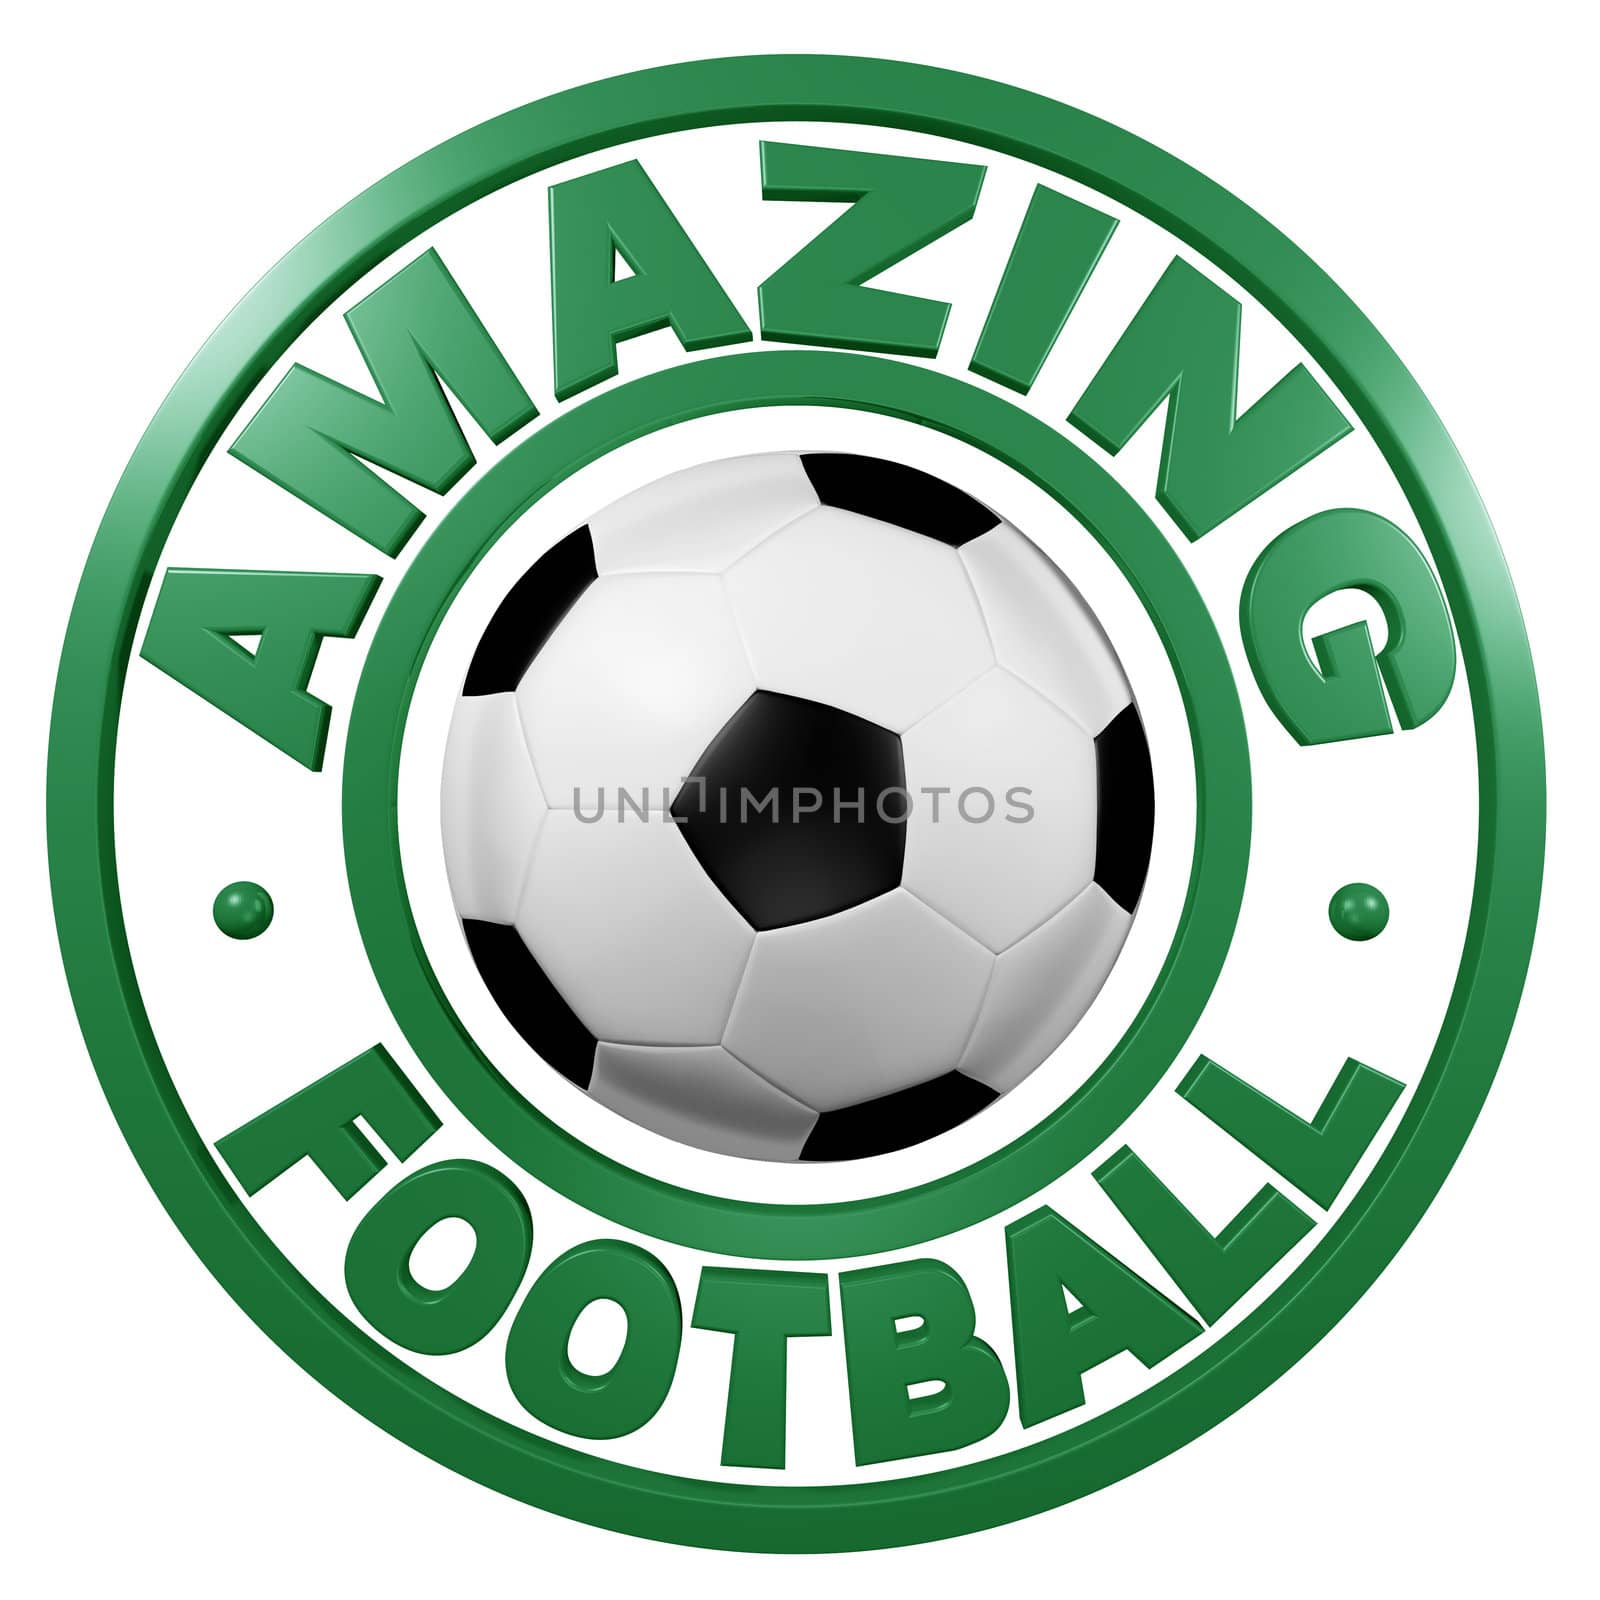 Amazing Football circular design with a white background